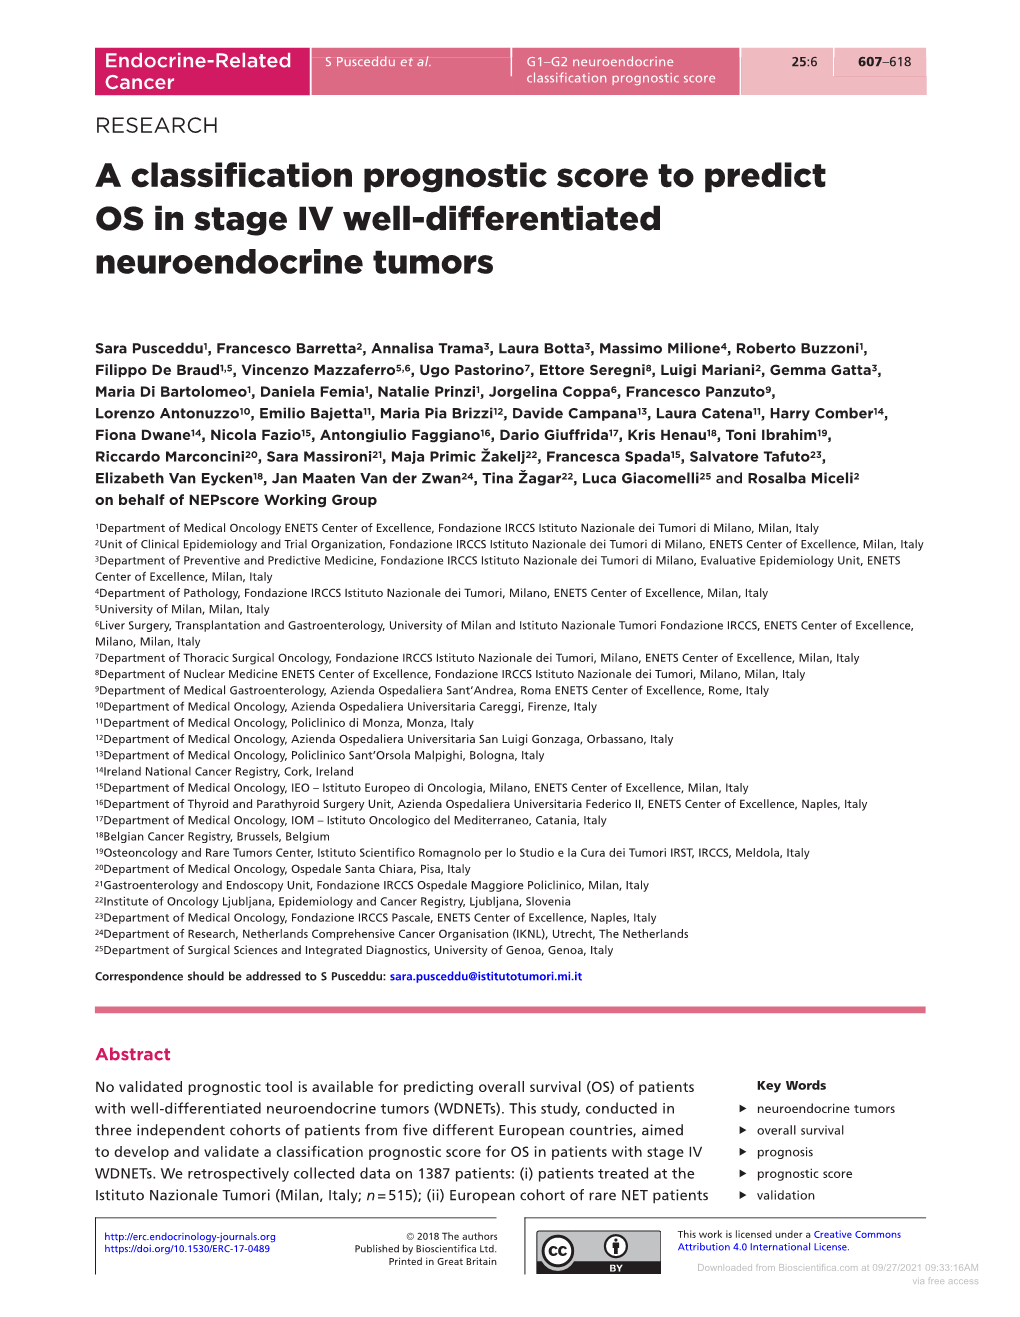 A Classification Prognostic Score to Predict OS in Stage IV Well-Differentiated Neuroendocrine Tumors